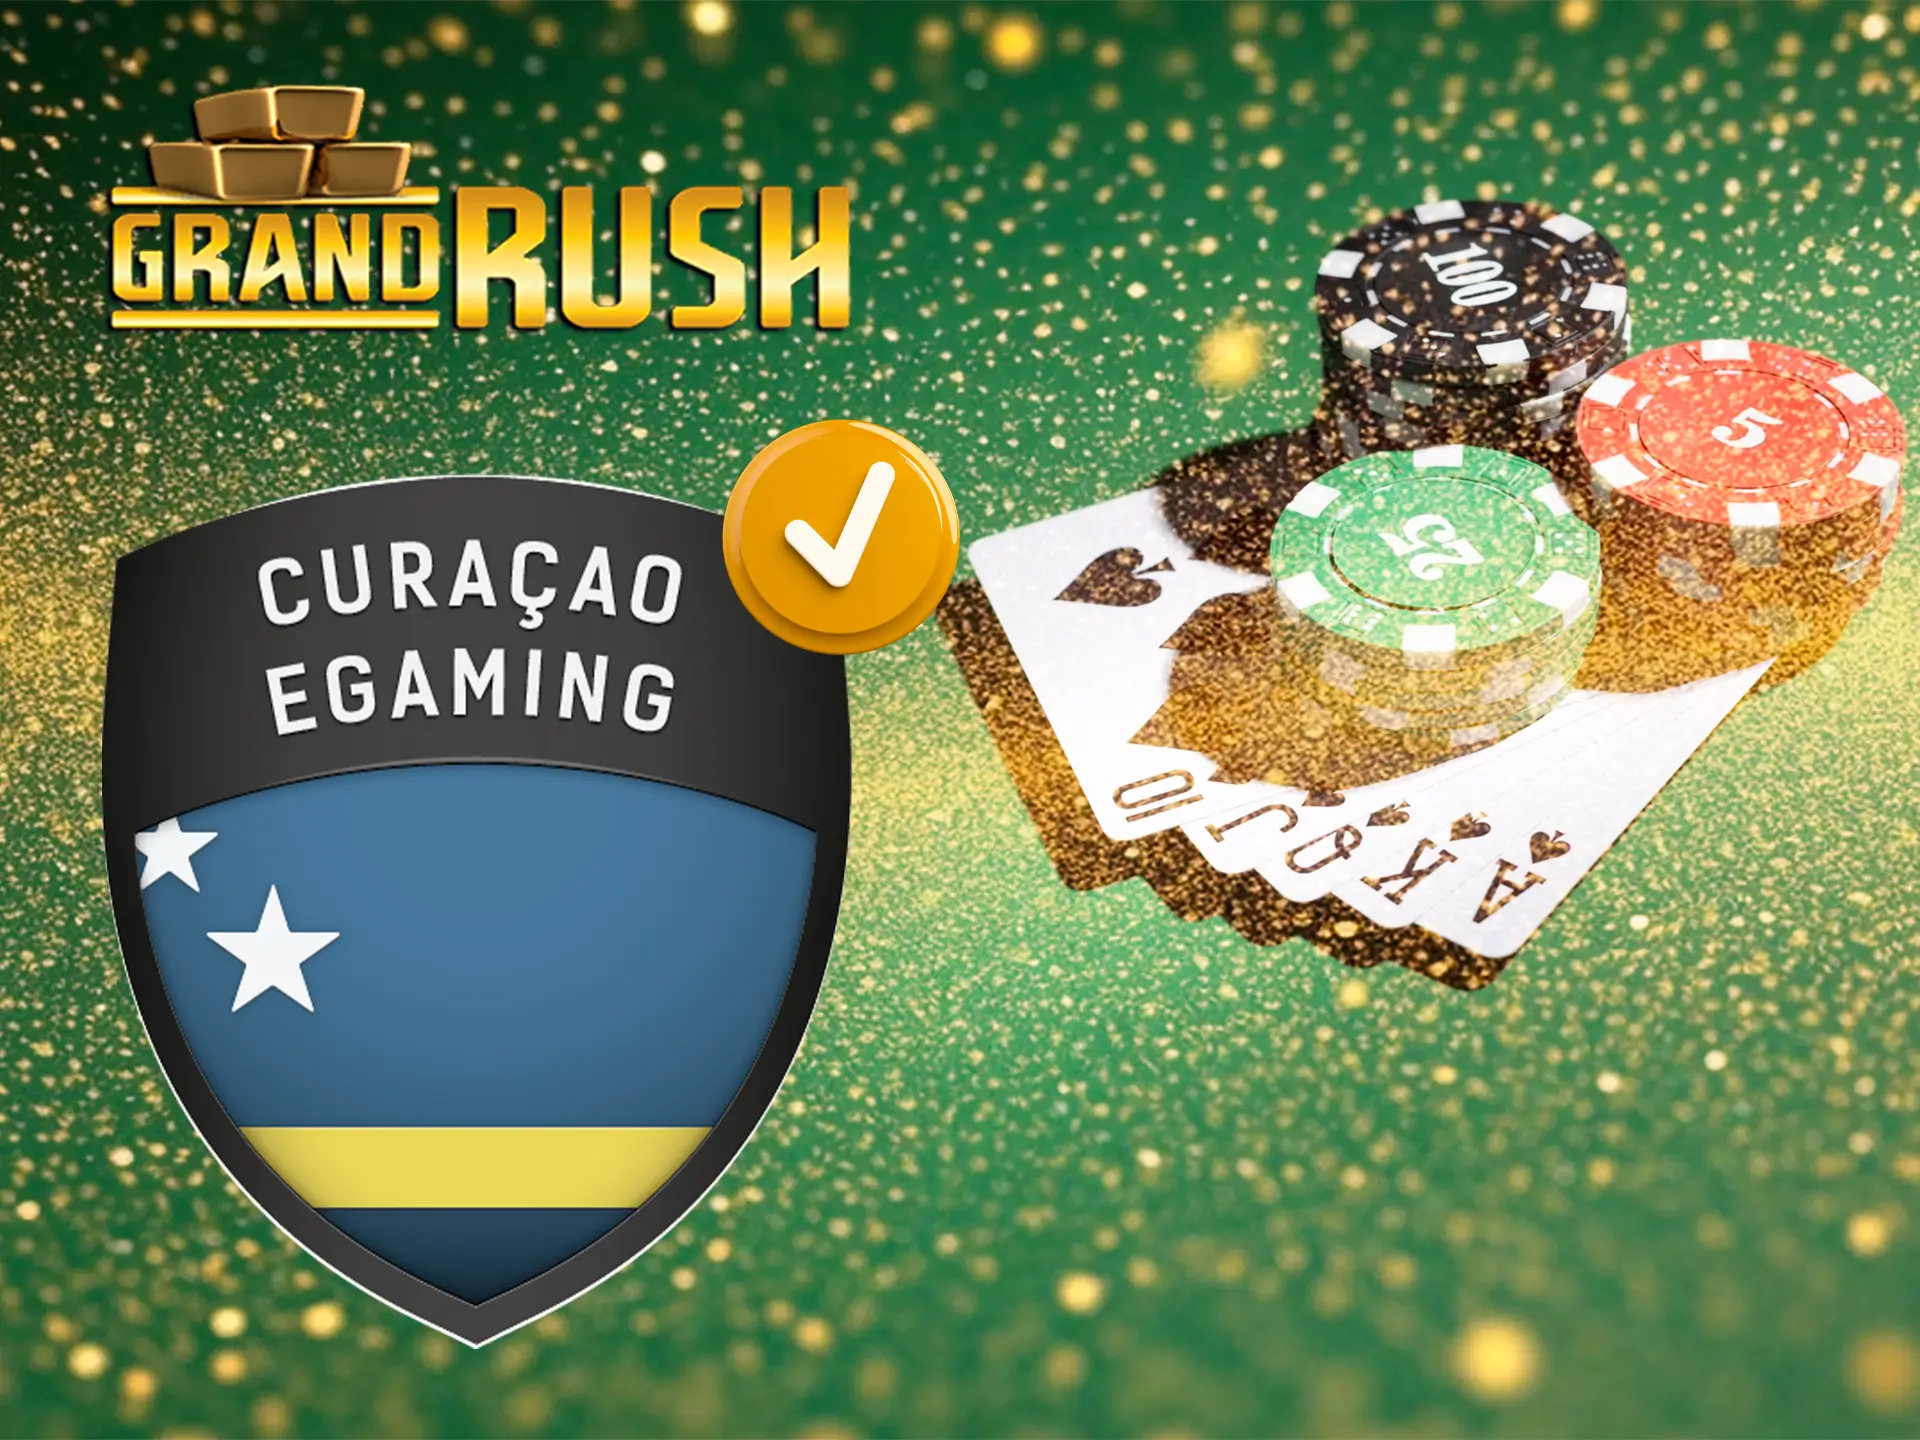 Grand Rush Casino is legal in Australia and operates under the Curacao license.